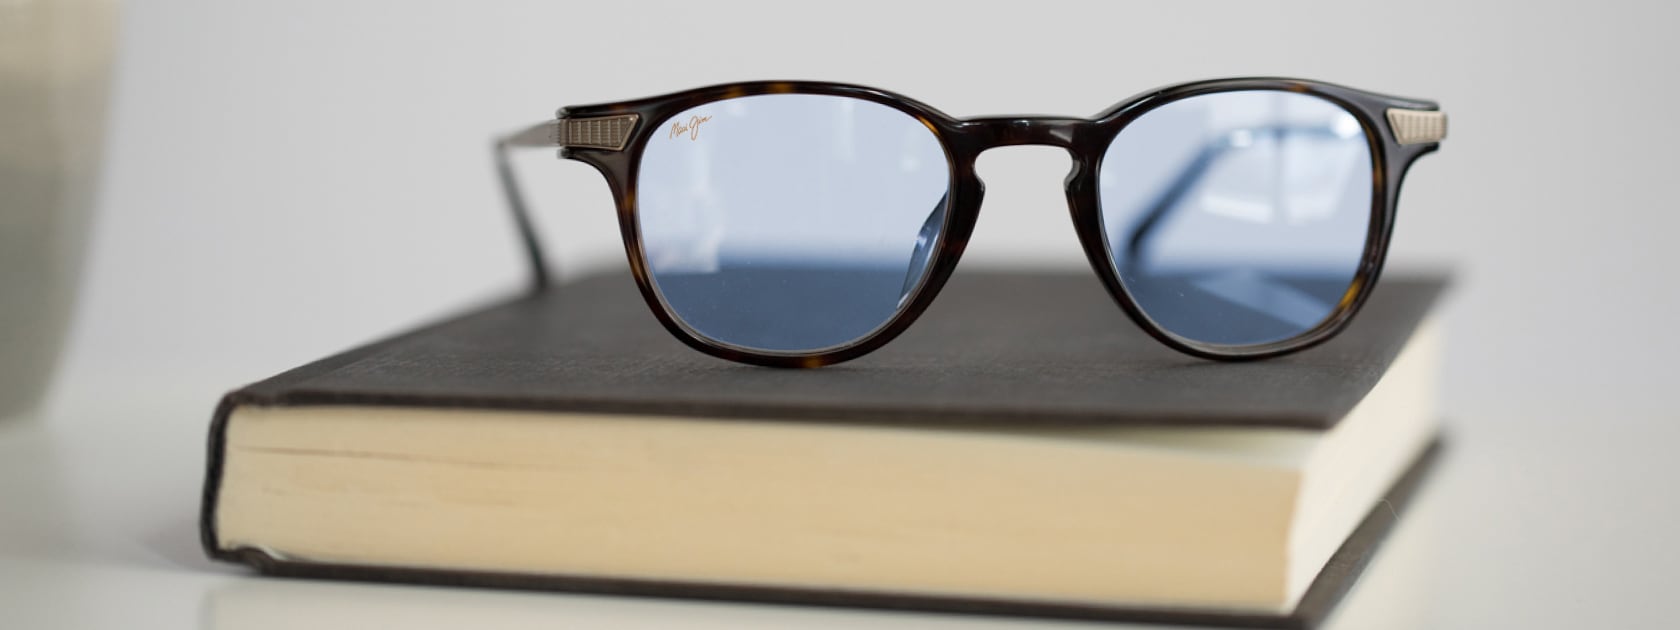 ophthalmic glasses sitting on book